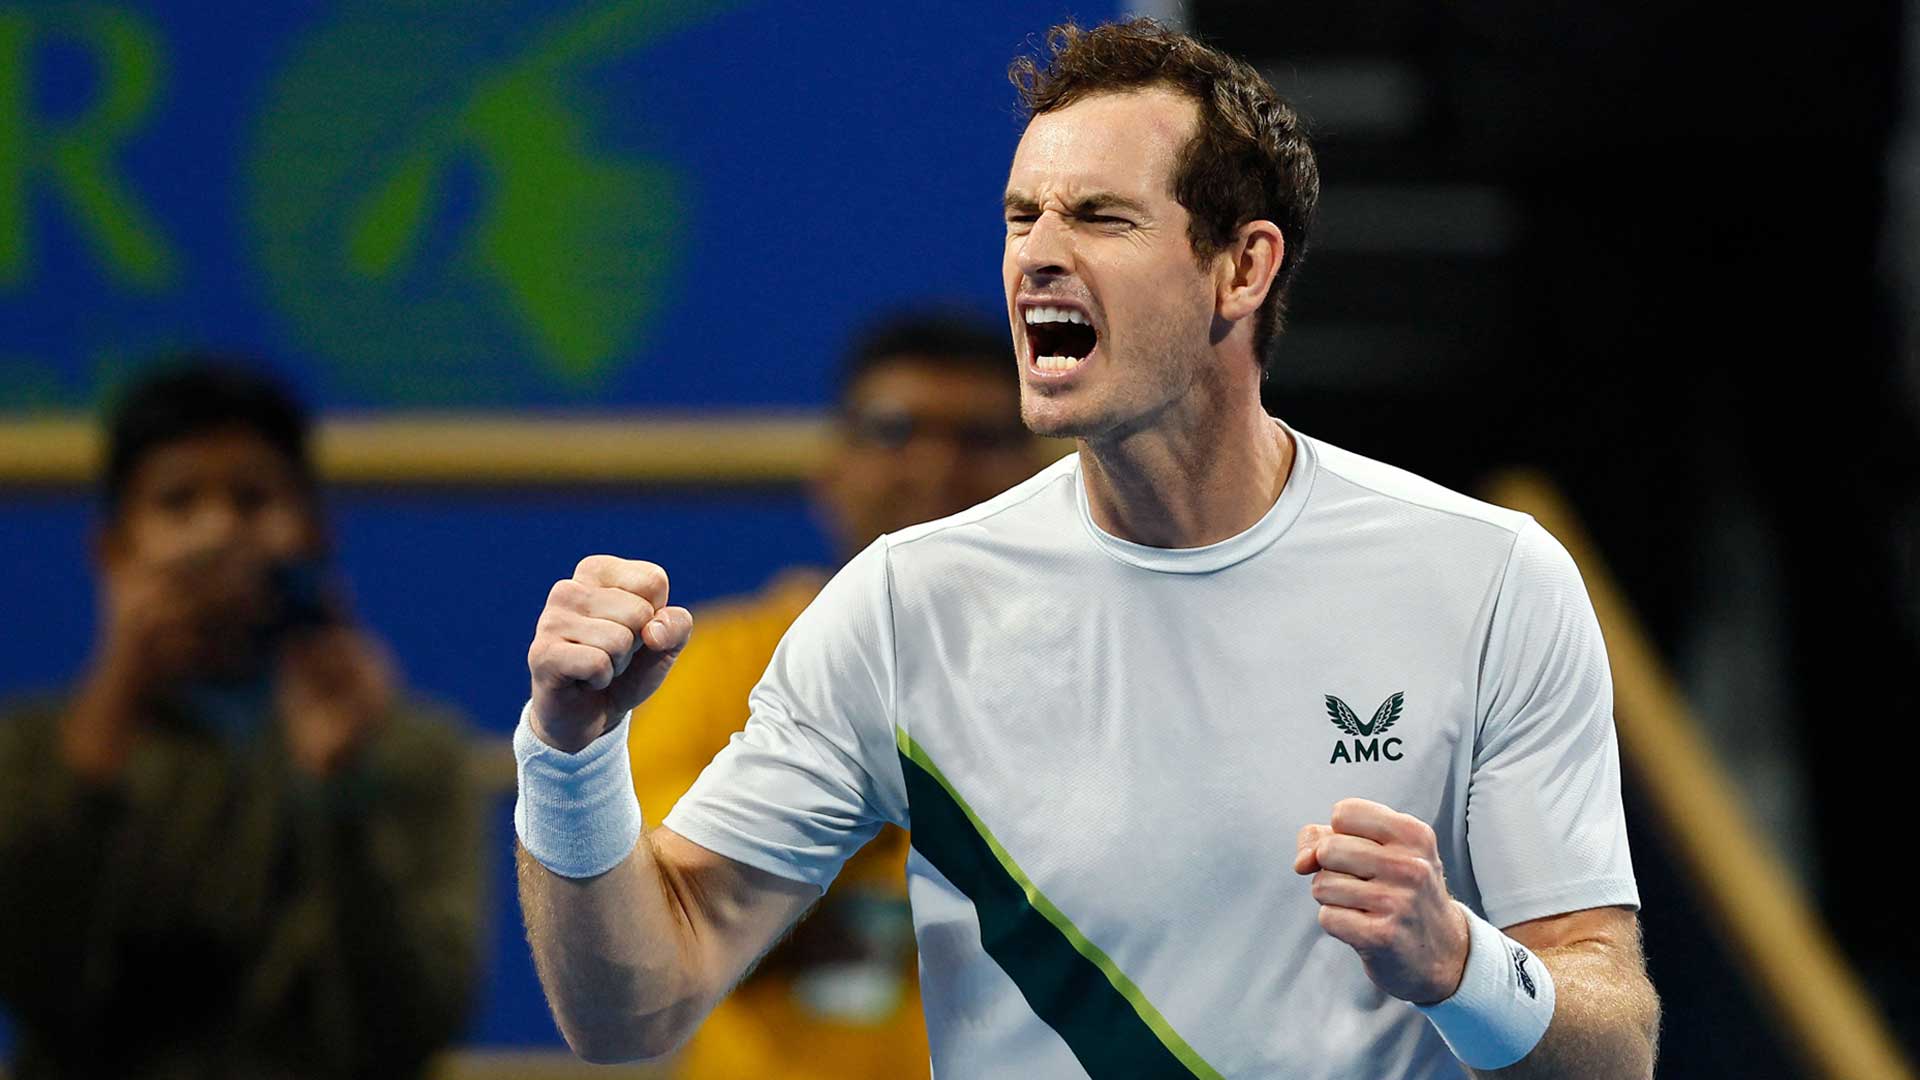 Andy Murray celebrates after saving five match points to defeat Jiri Lehecka in late February in Doha.